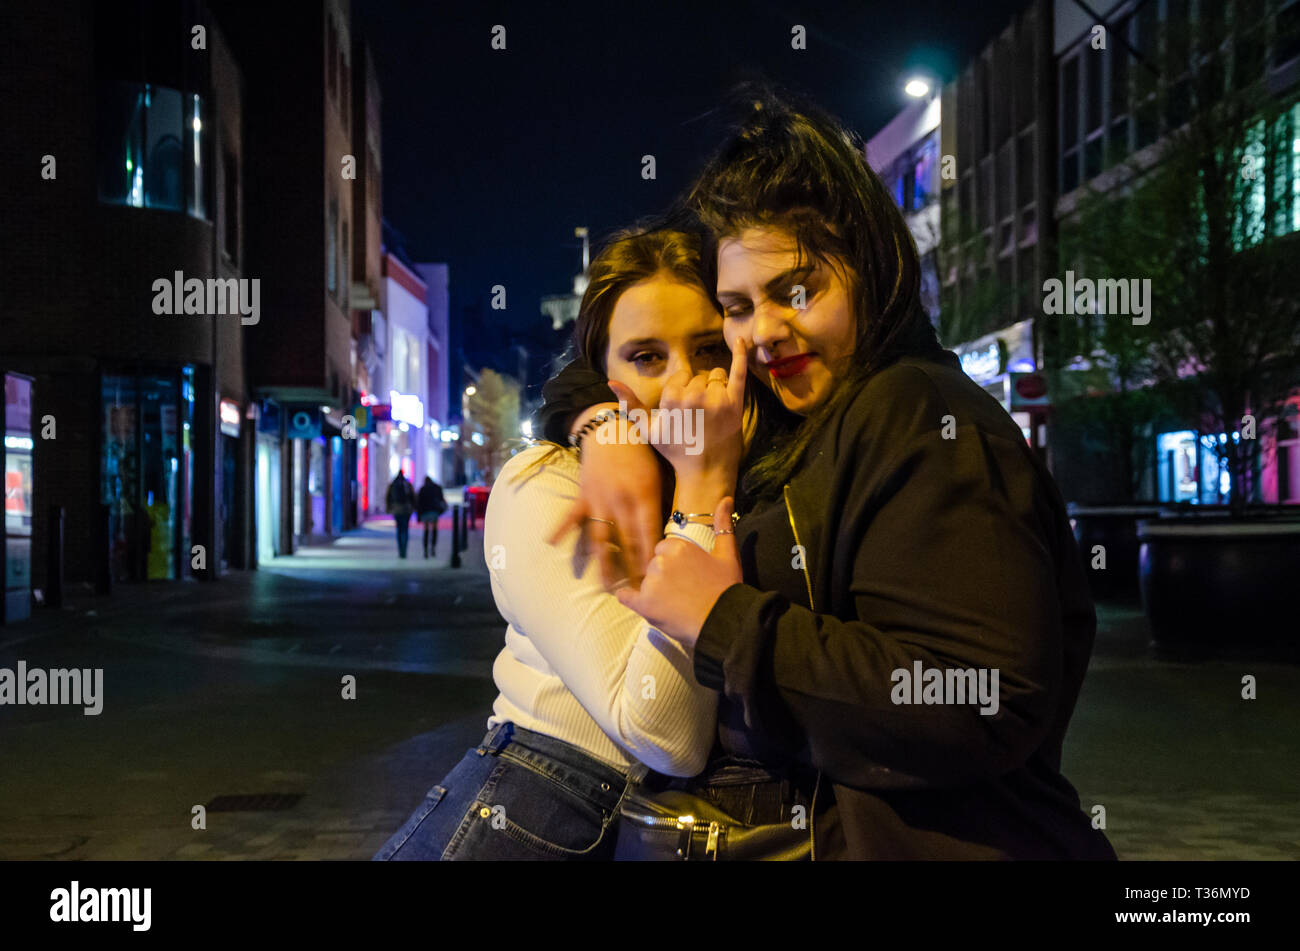 A couple of young women pose for a portrait in Peascod Street, Windsor, UK on a Saturday night. Stock Photo